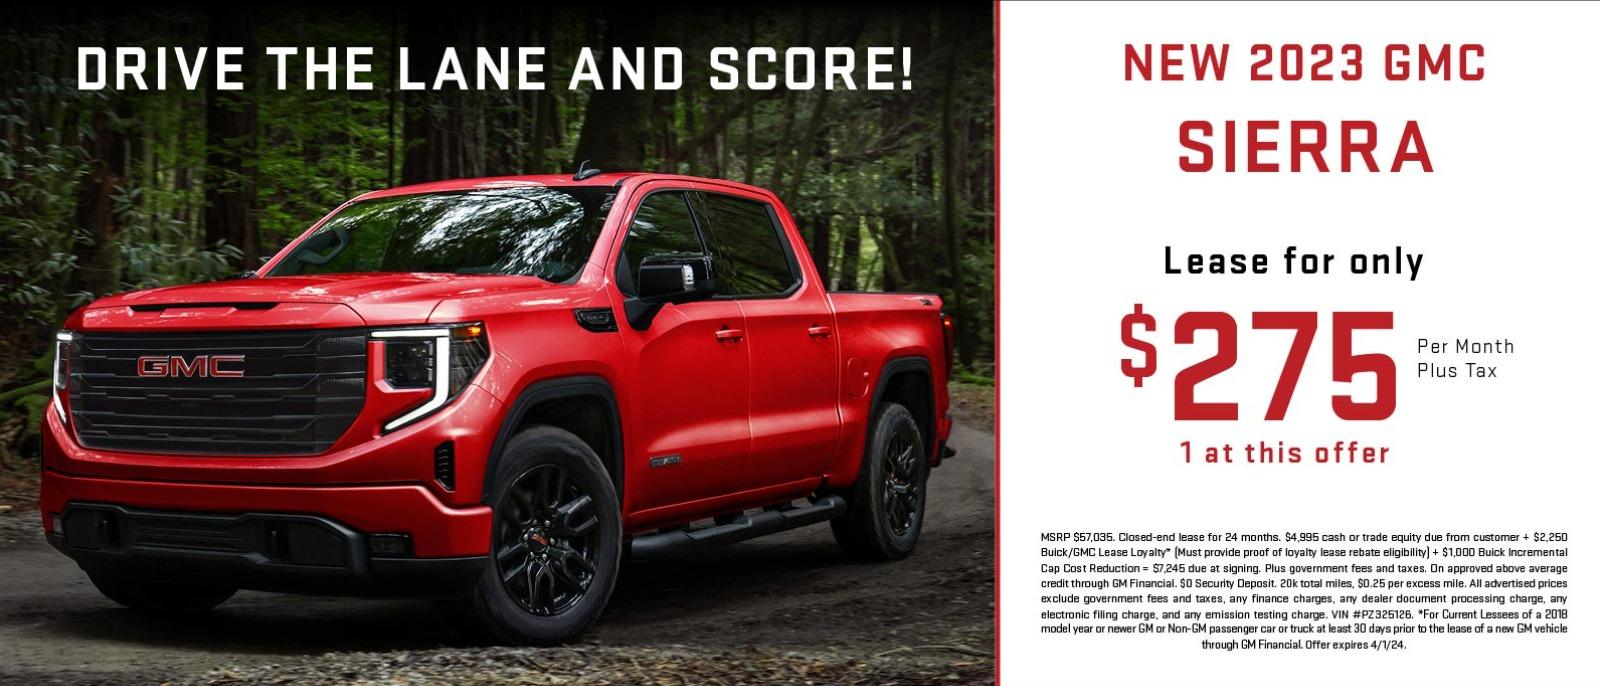 NEW 2023 GMC SIERRA Lease for only $275 1 at this offer Per Month Plus Tax